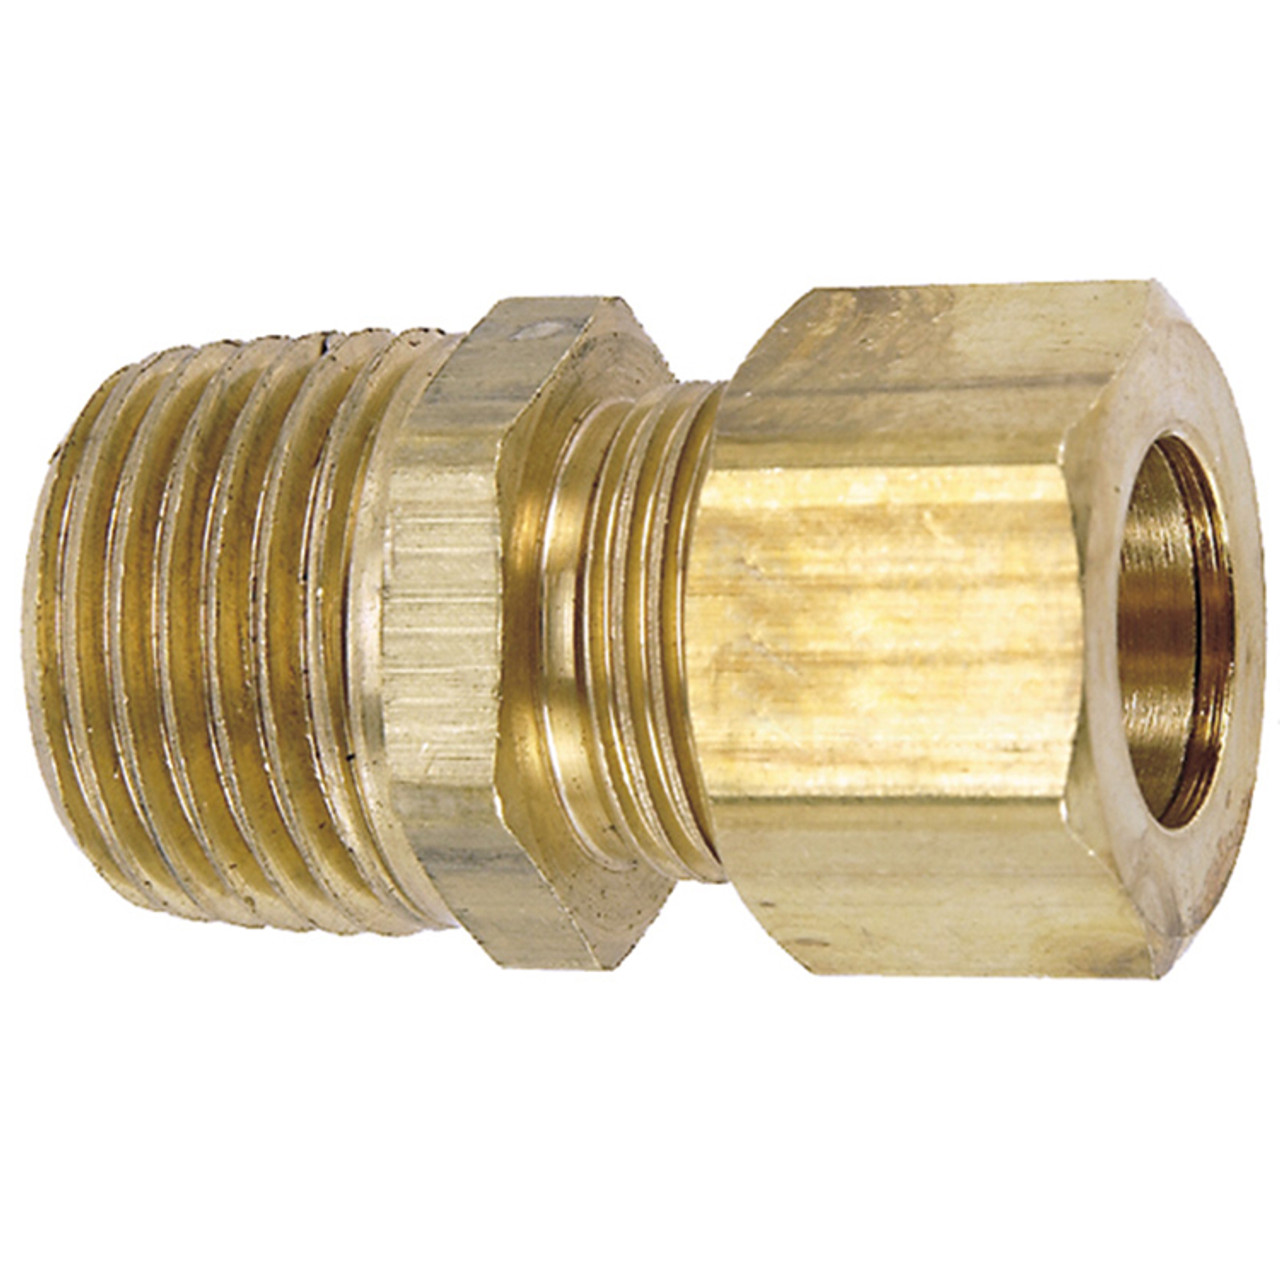 3/8 x 5/16" Brass Male NPT - Compression Connector   G6016-06-05